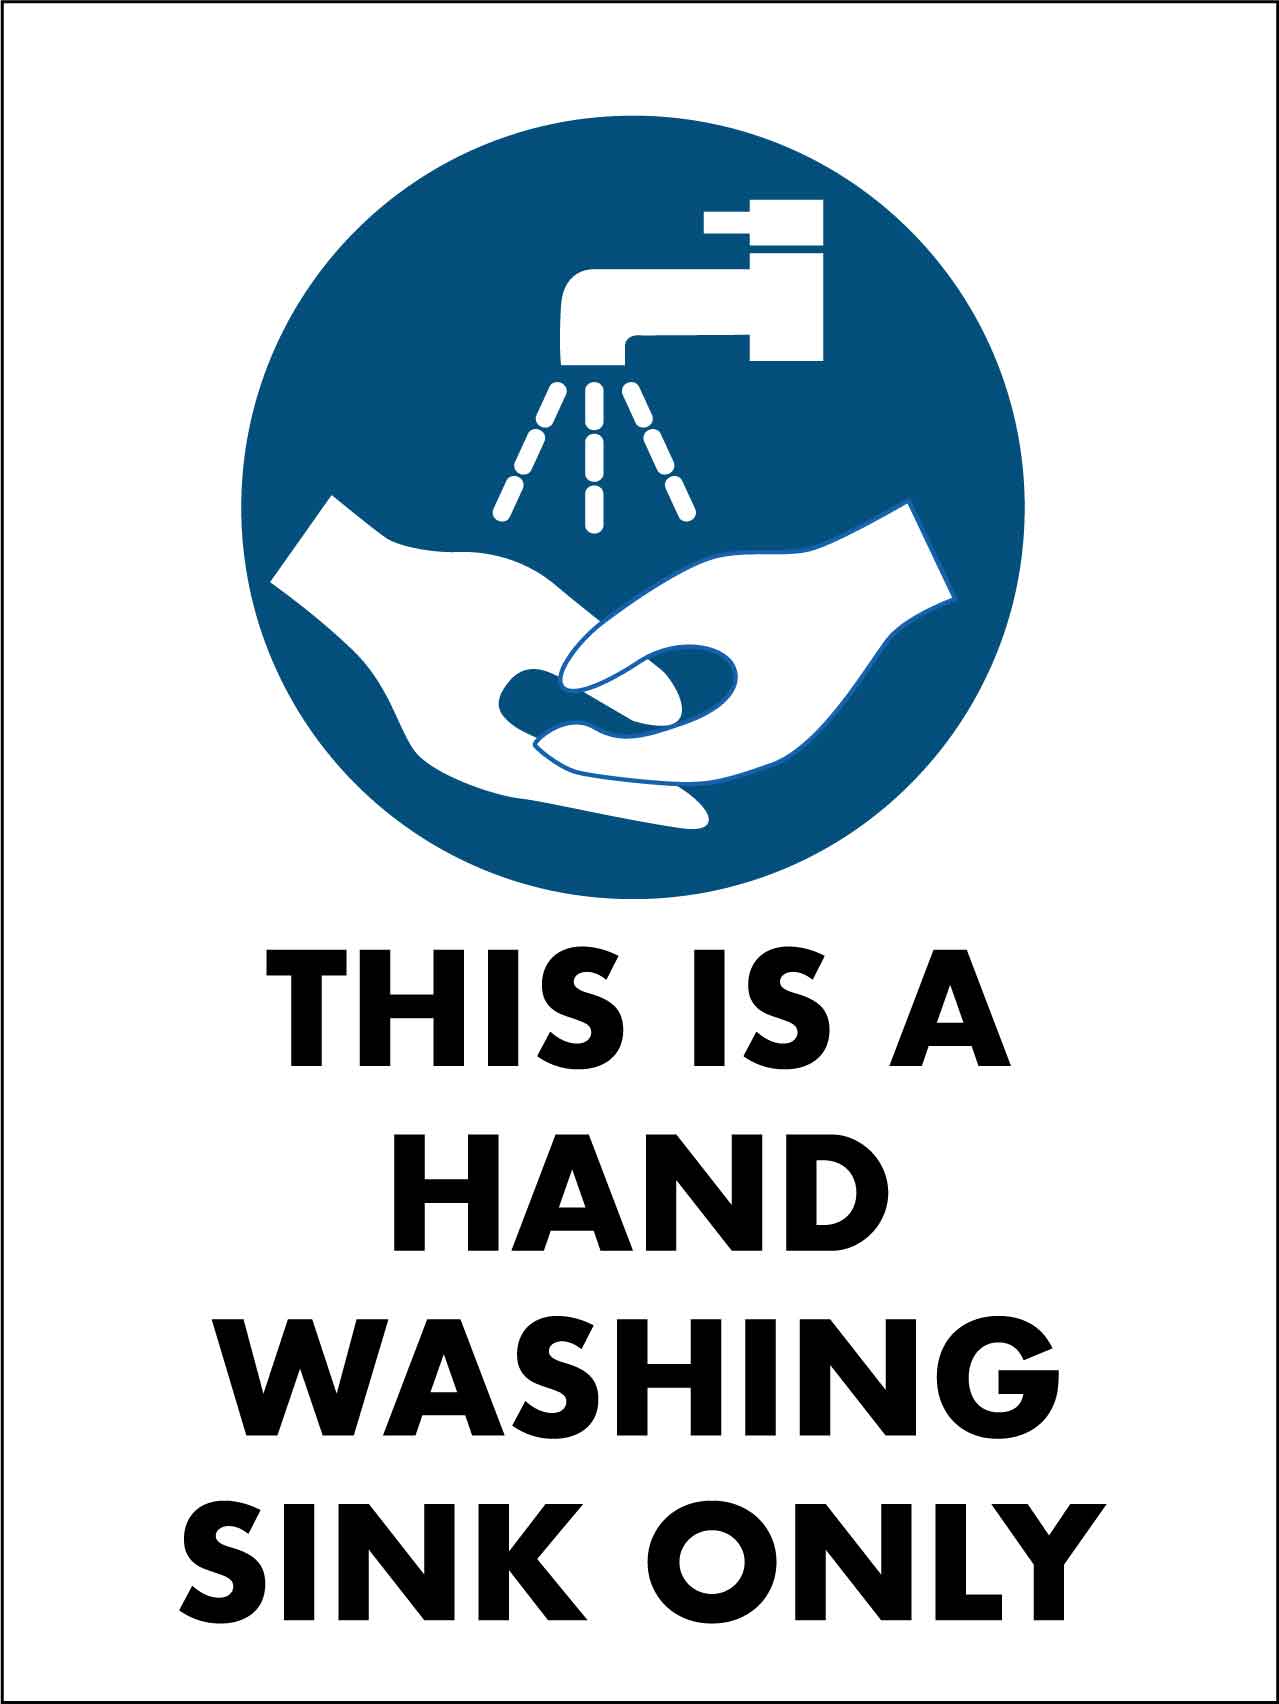 sink-for-hand-washing-only-sign-ubicaciondepersonas-cdmx-gob-mx